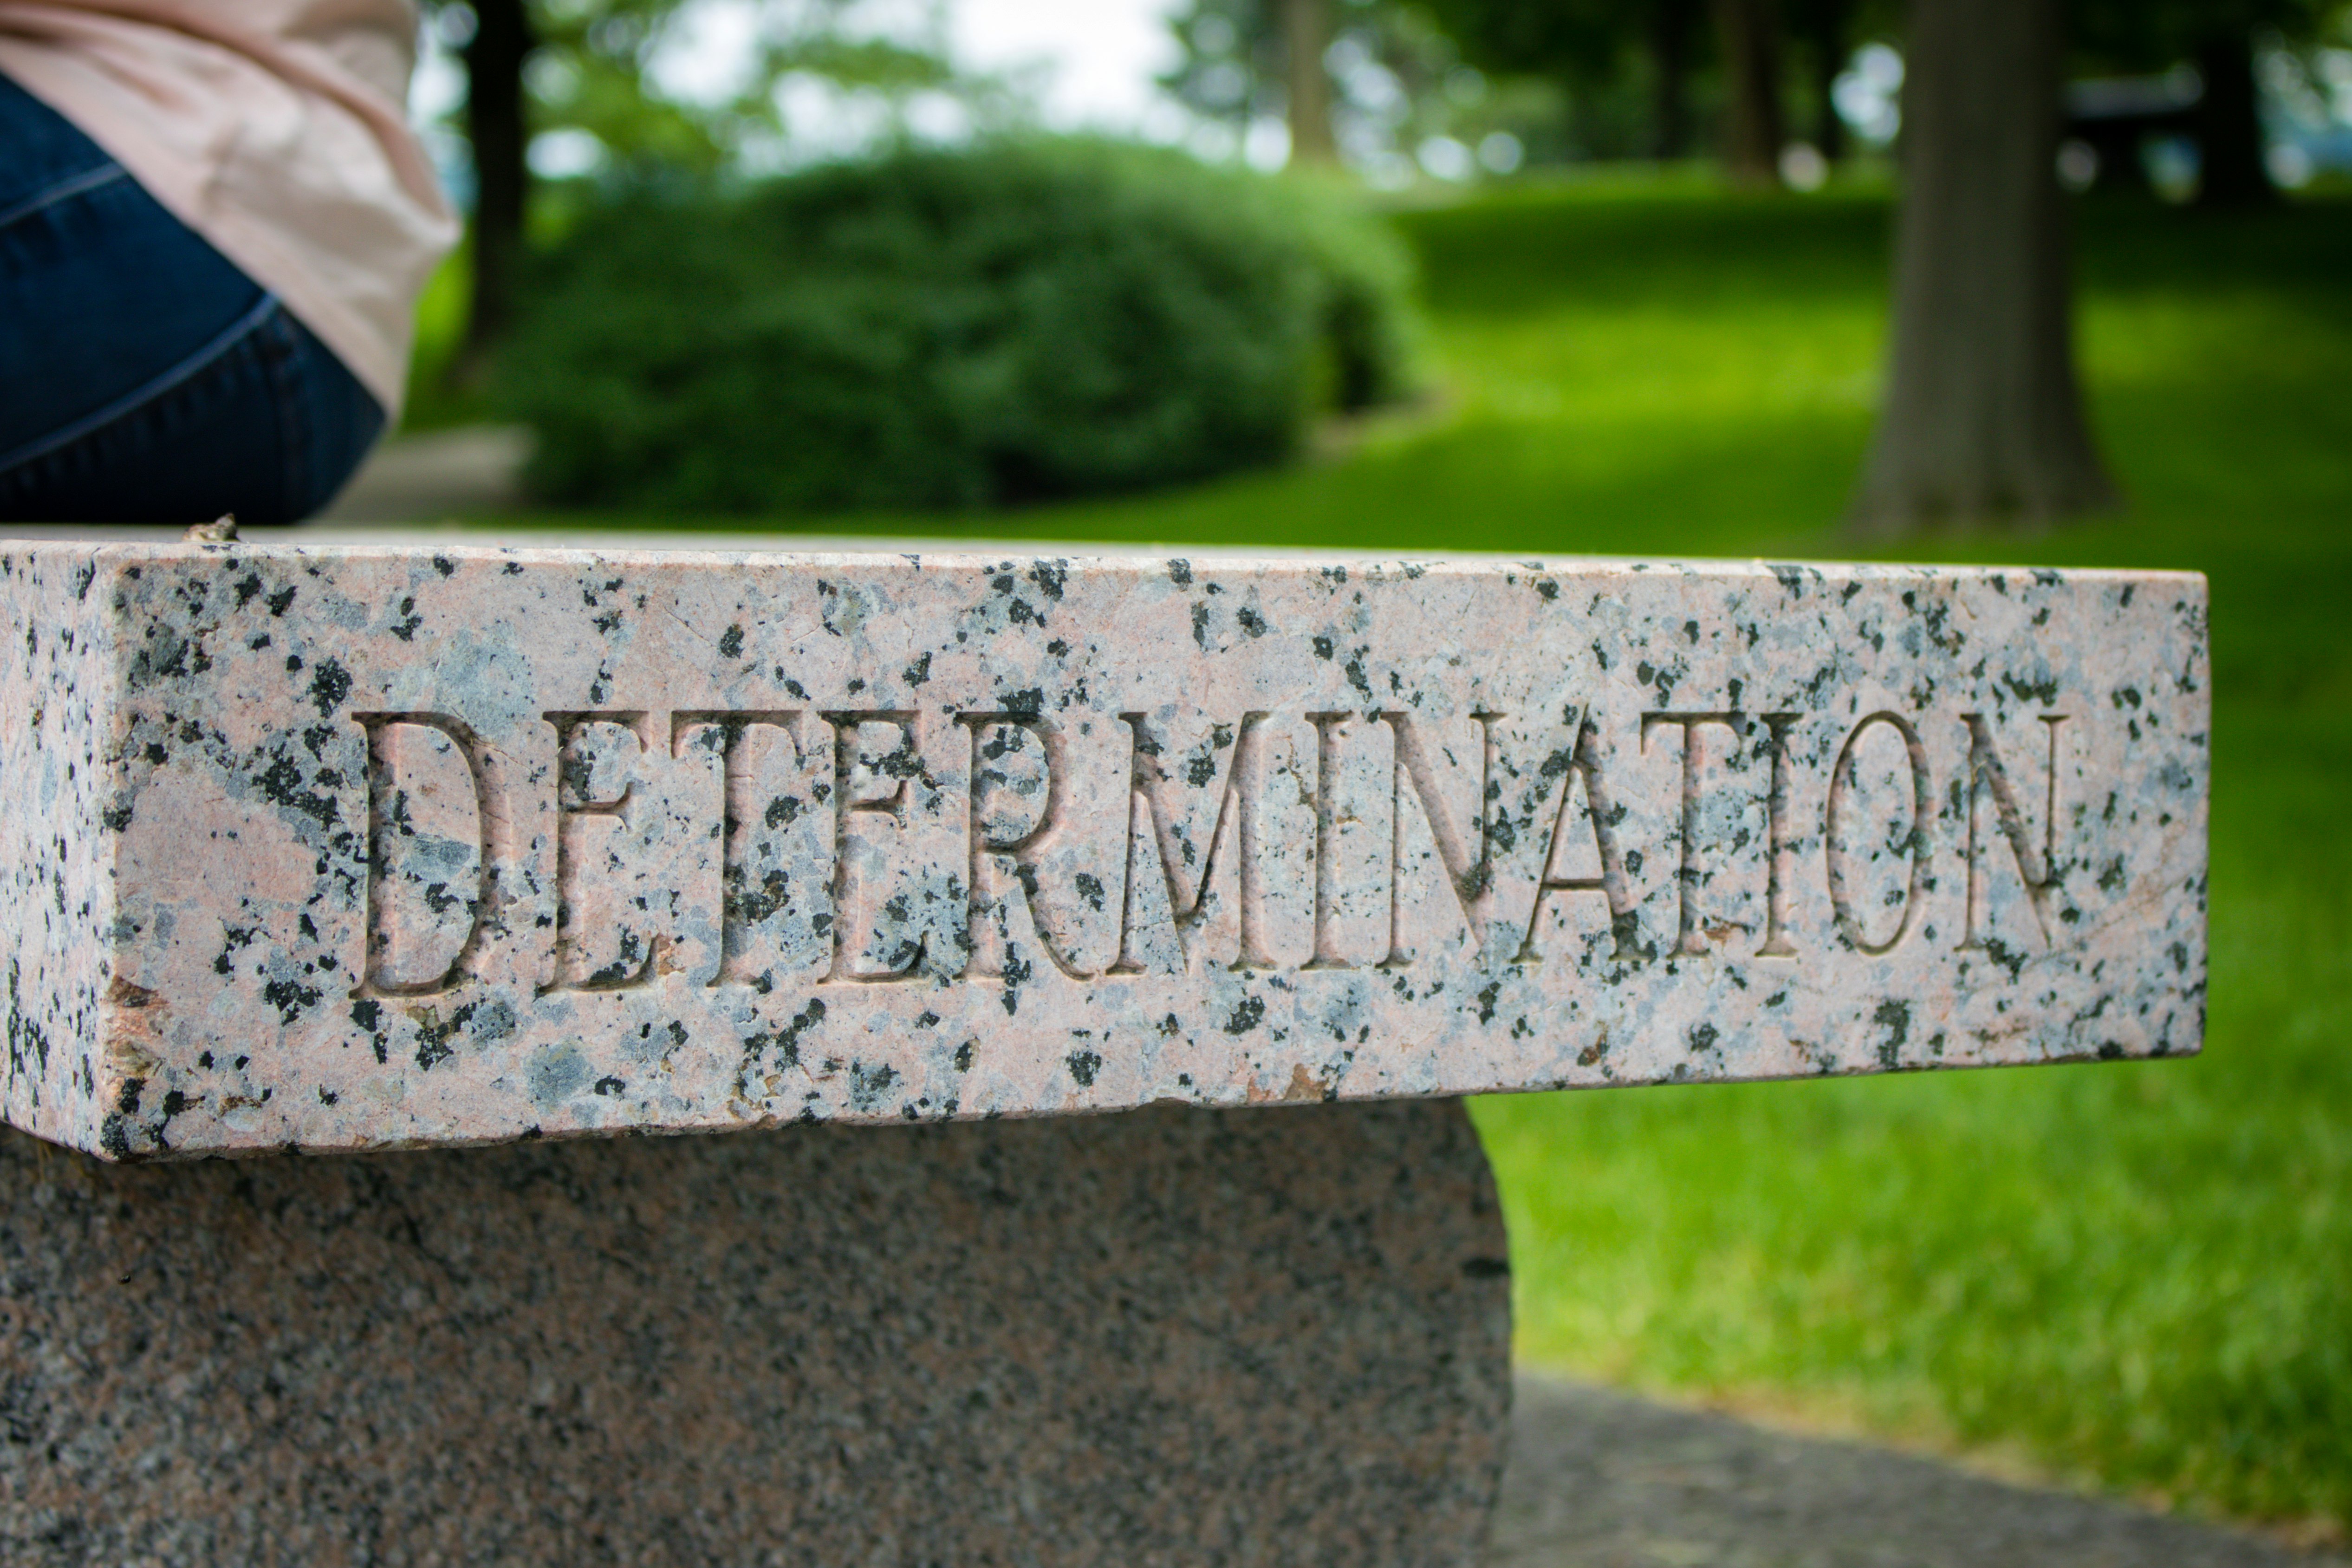 "Determination" bench - Trophy Point at the United States Military Academy at West Point